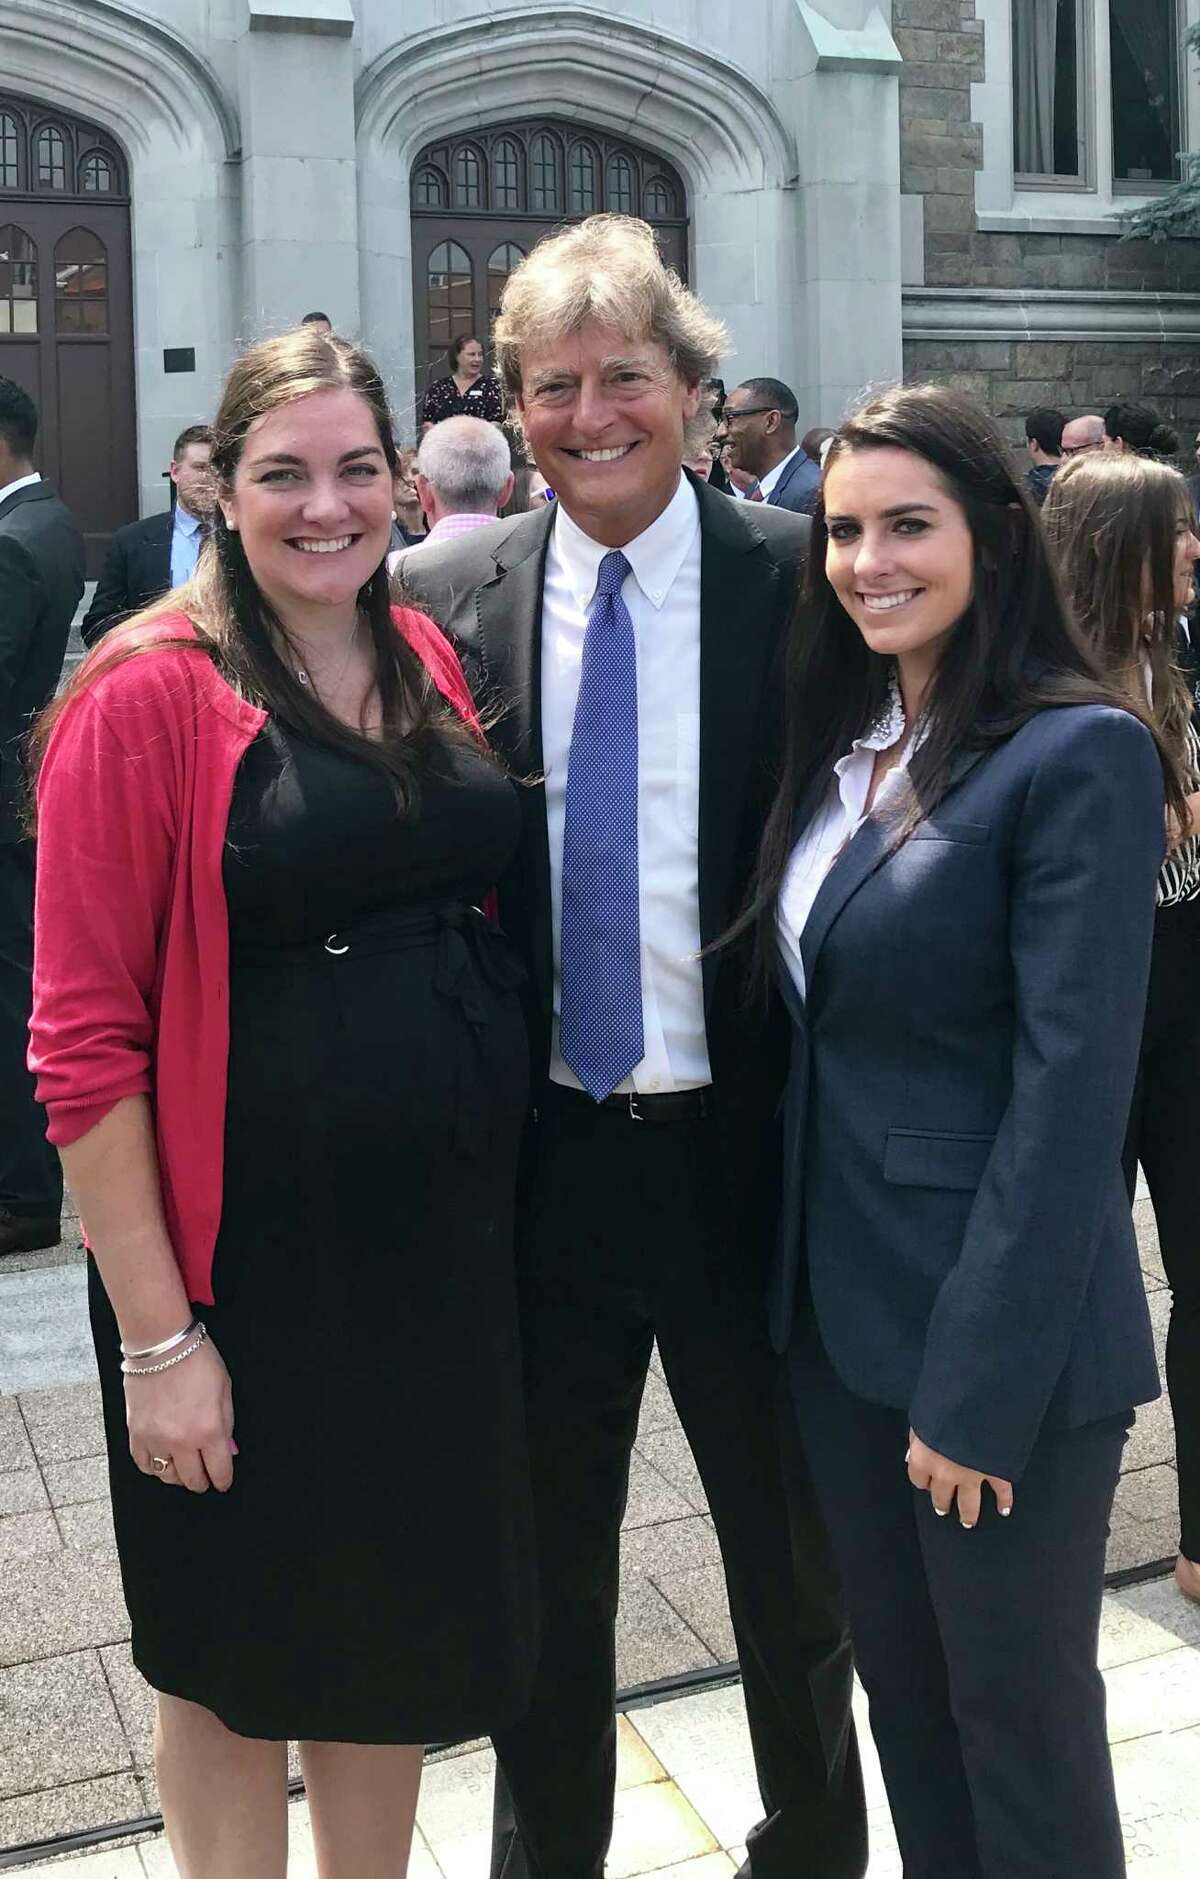 udge Peter G. Crummey, center, Colonie senior town justice and court administrator, was on hand for this year's Albany Law School 1L swearing-in ceremony. His daughter, Cathryn, is a member of the 1L class. At the reception, Judge Crummey (class of '81) was pictured with Cathryn, on the right, and daughter Carol (class of '13). The judgeas grandfather, Edward J. Crummey of Albany graduated from Albany Law School in 1910. The judge currently serves on Albany Law Schoolas board of trustees and is president-elect of the Law Schoolas National Alumni Association.(Submitted photo)